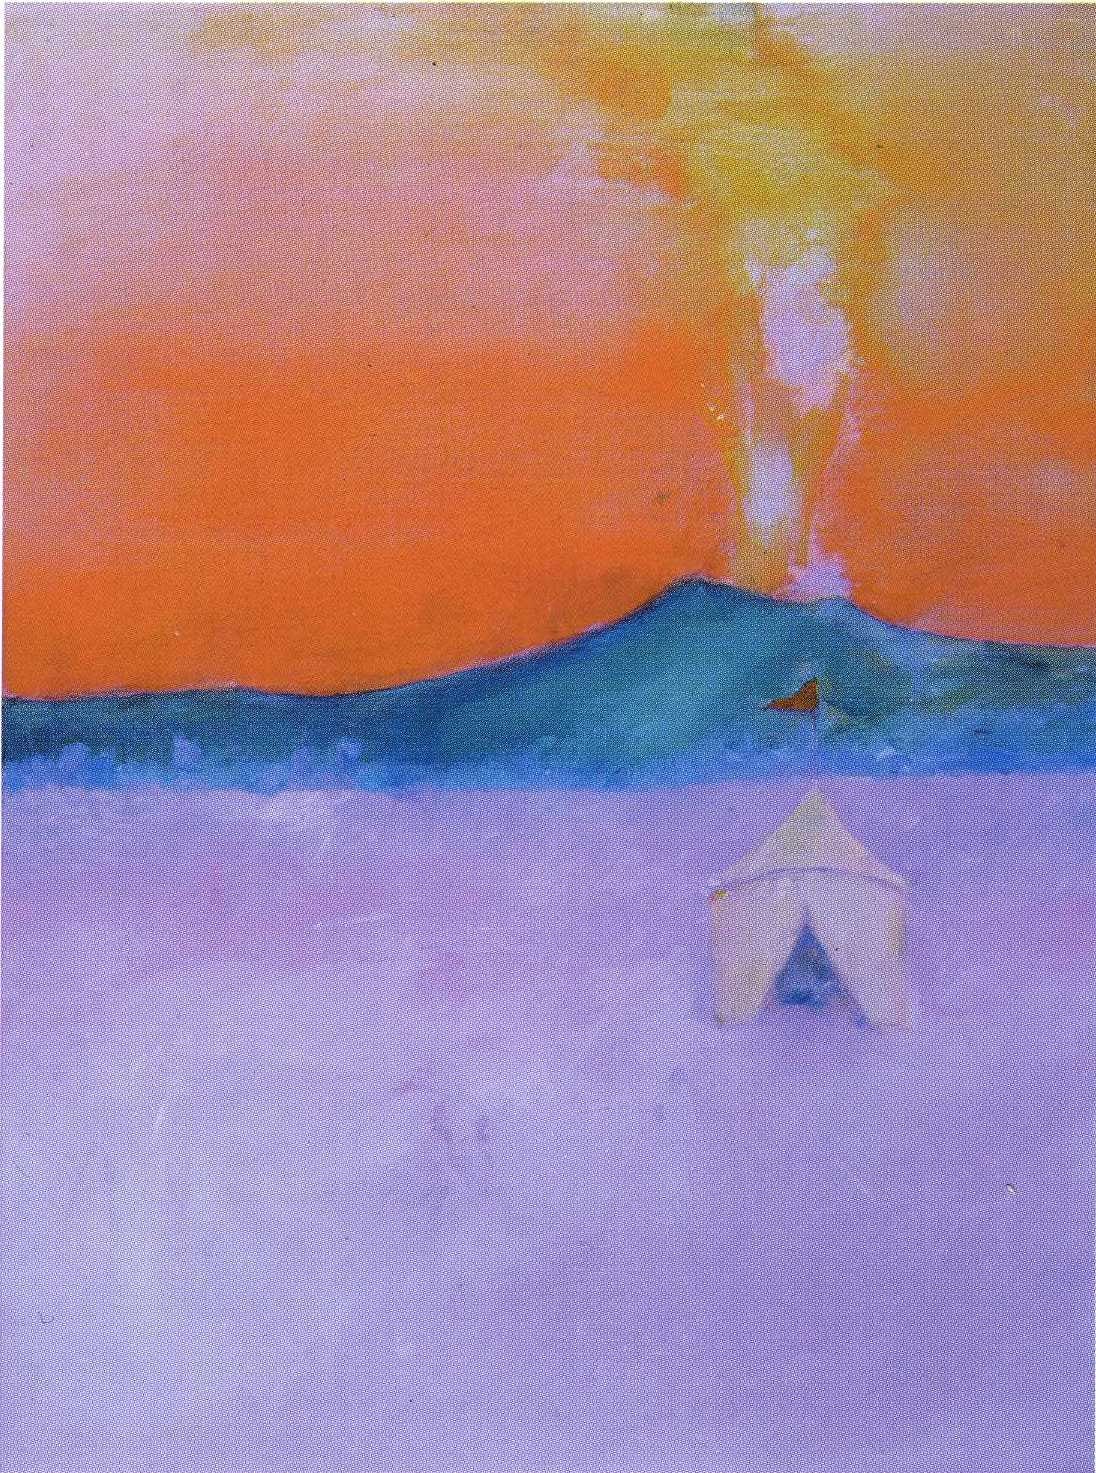 ANTHONY FRY, Volcano with Tent